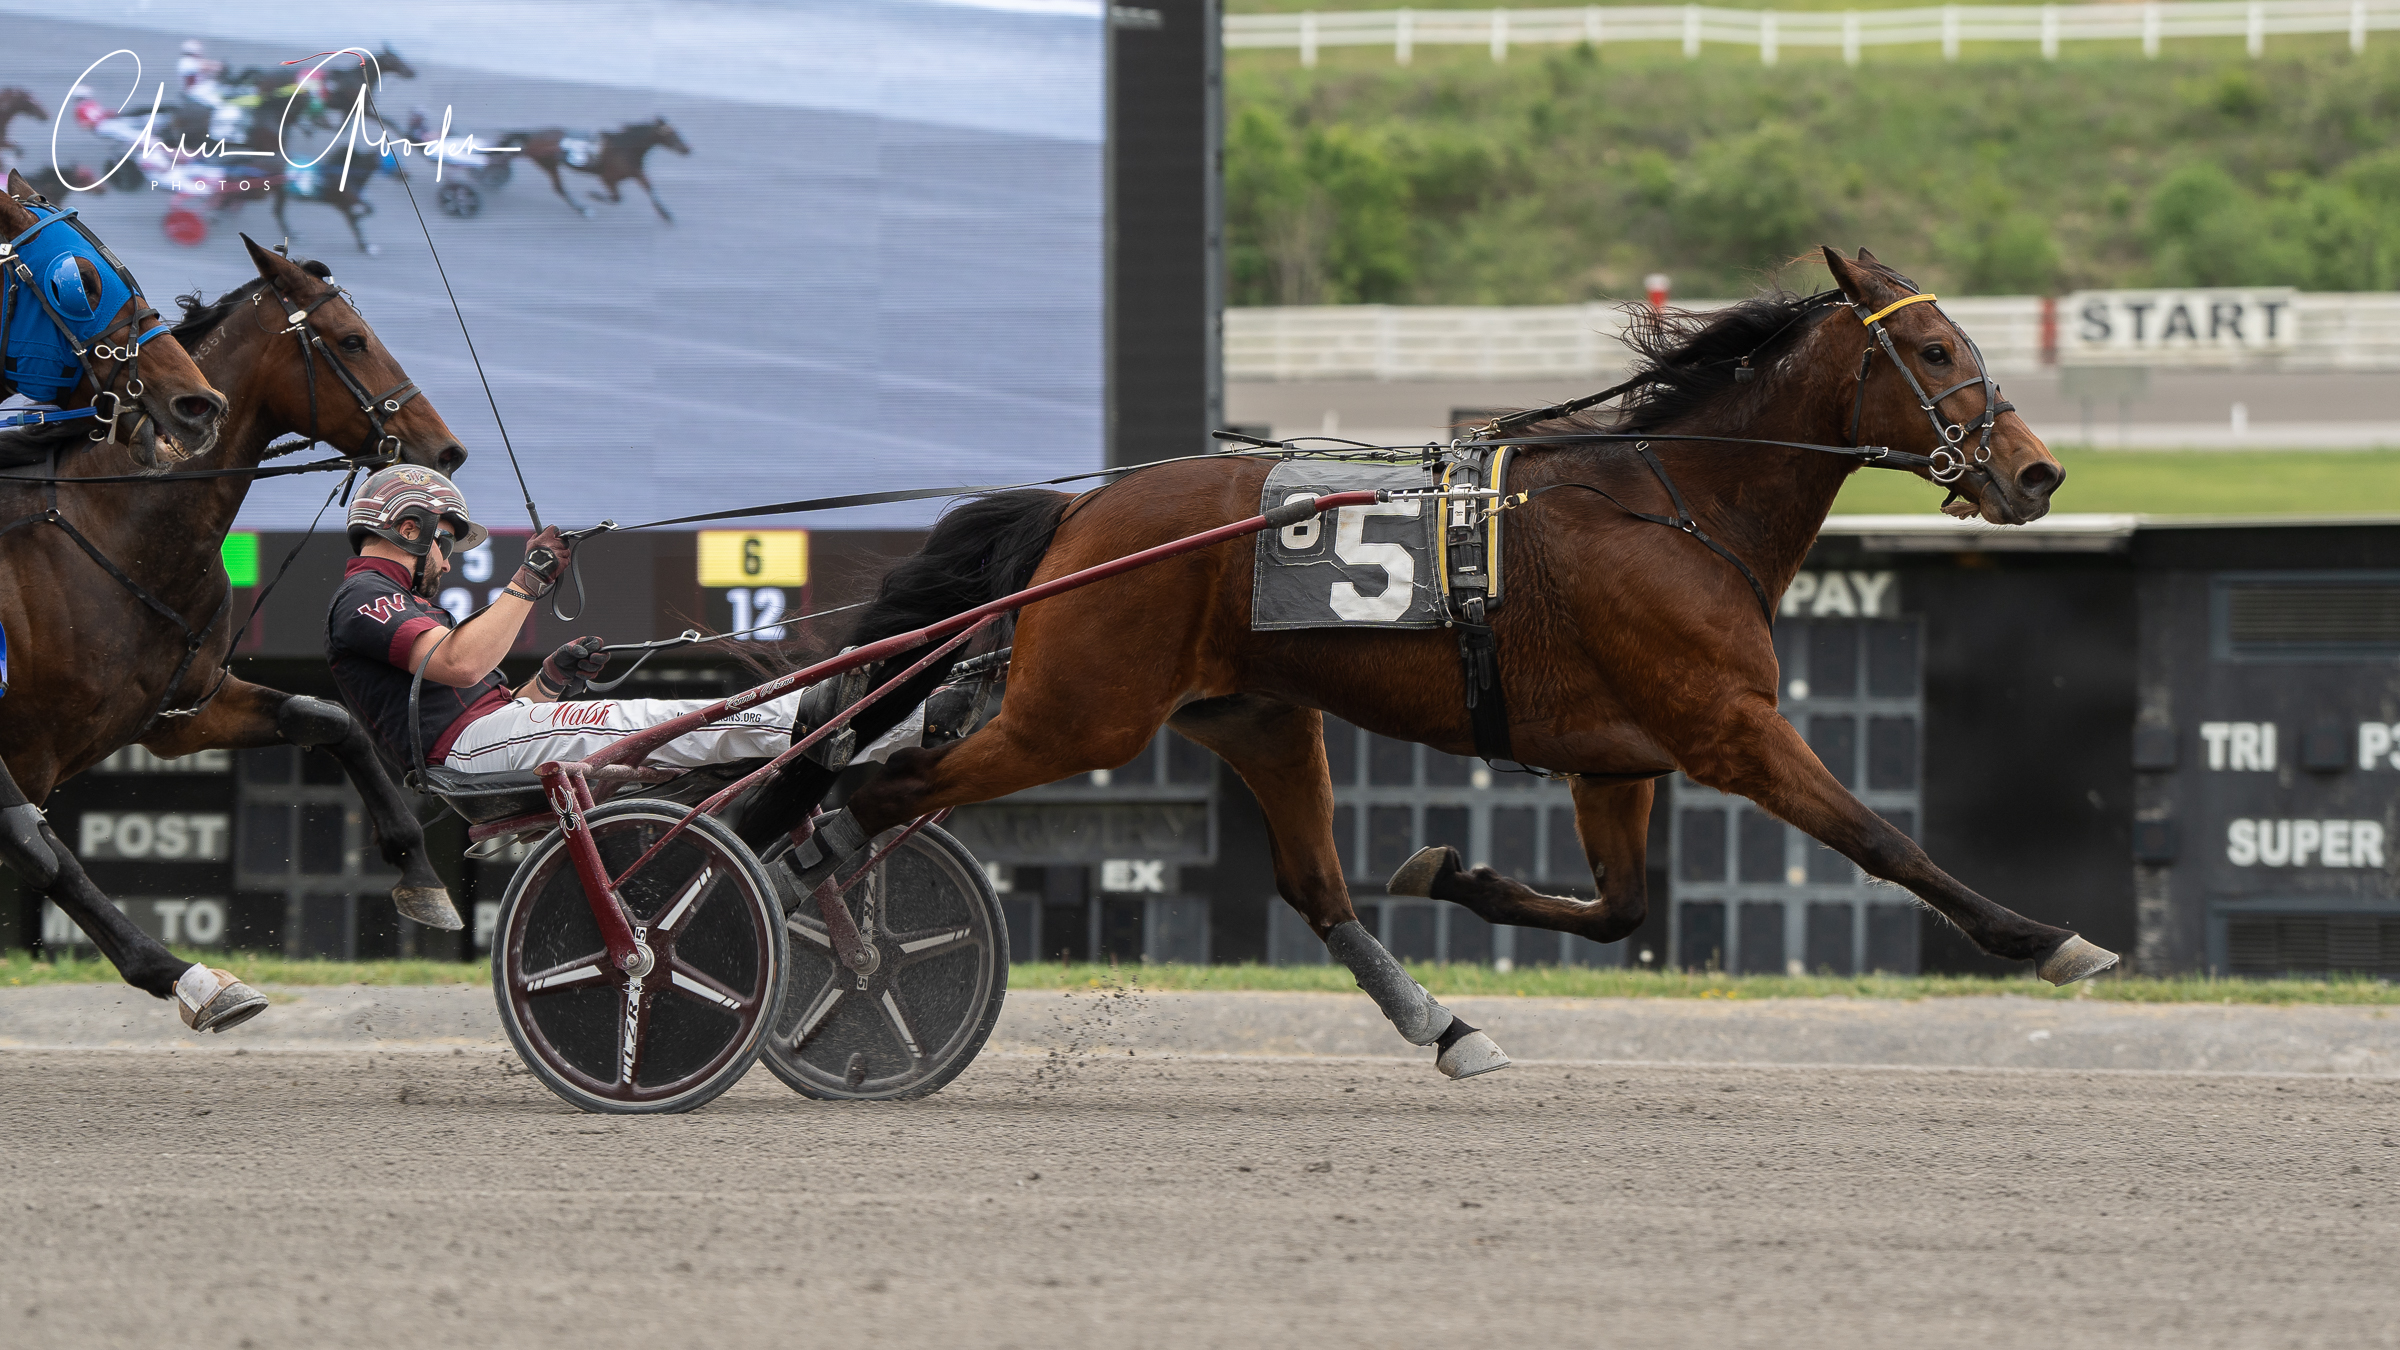 Top trot goes to repeat winner at The Meadows